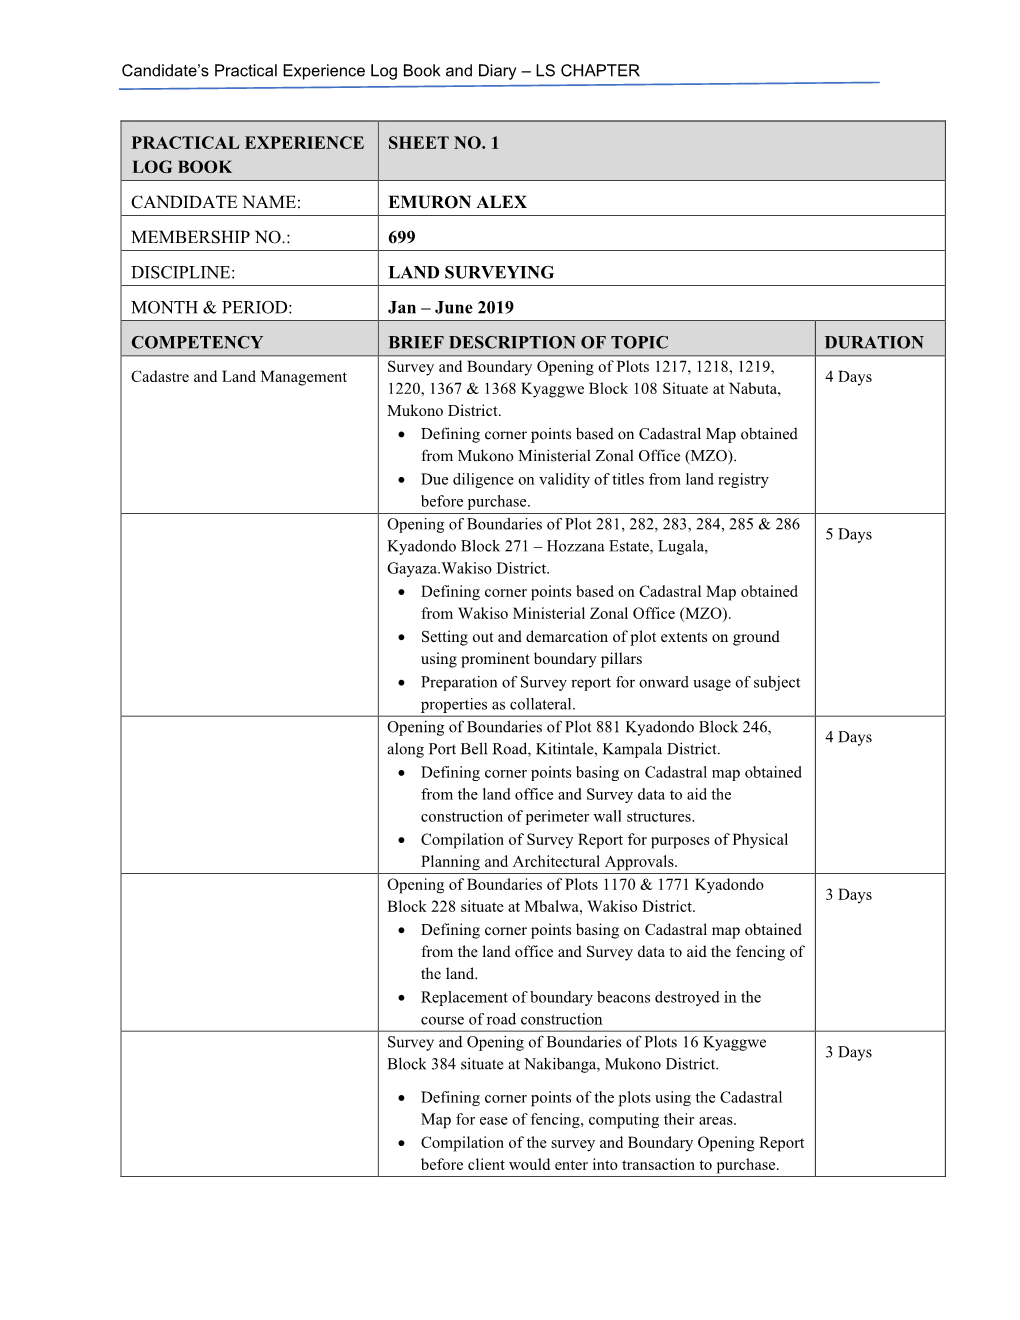 Practical Experience Log Book Sheet No. 1 Candidate